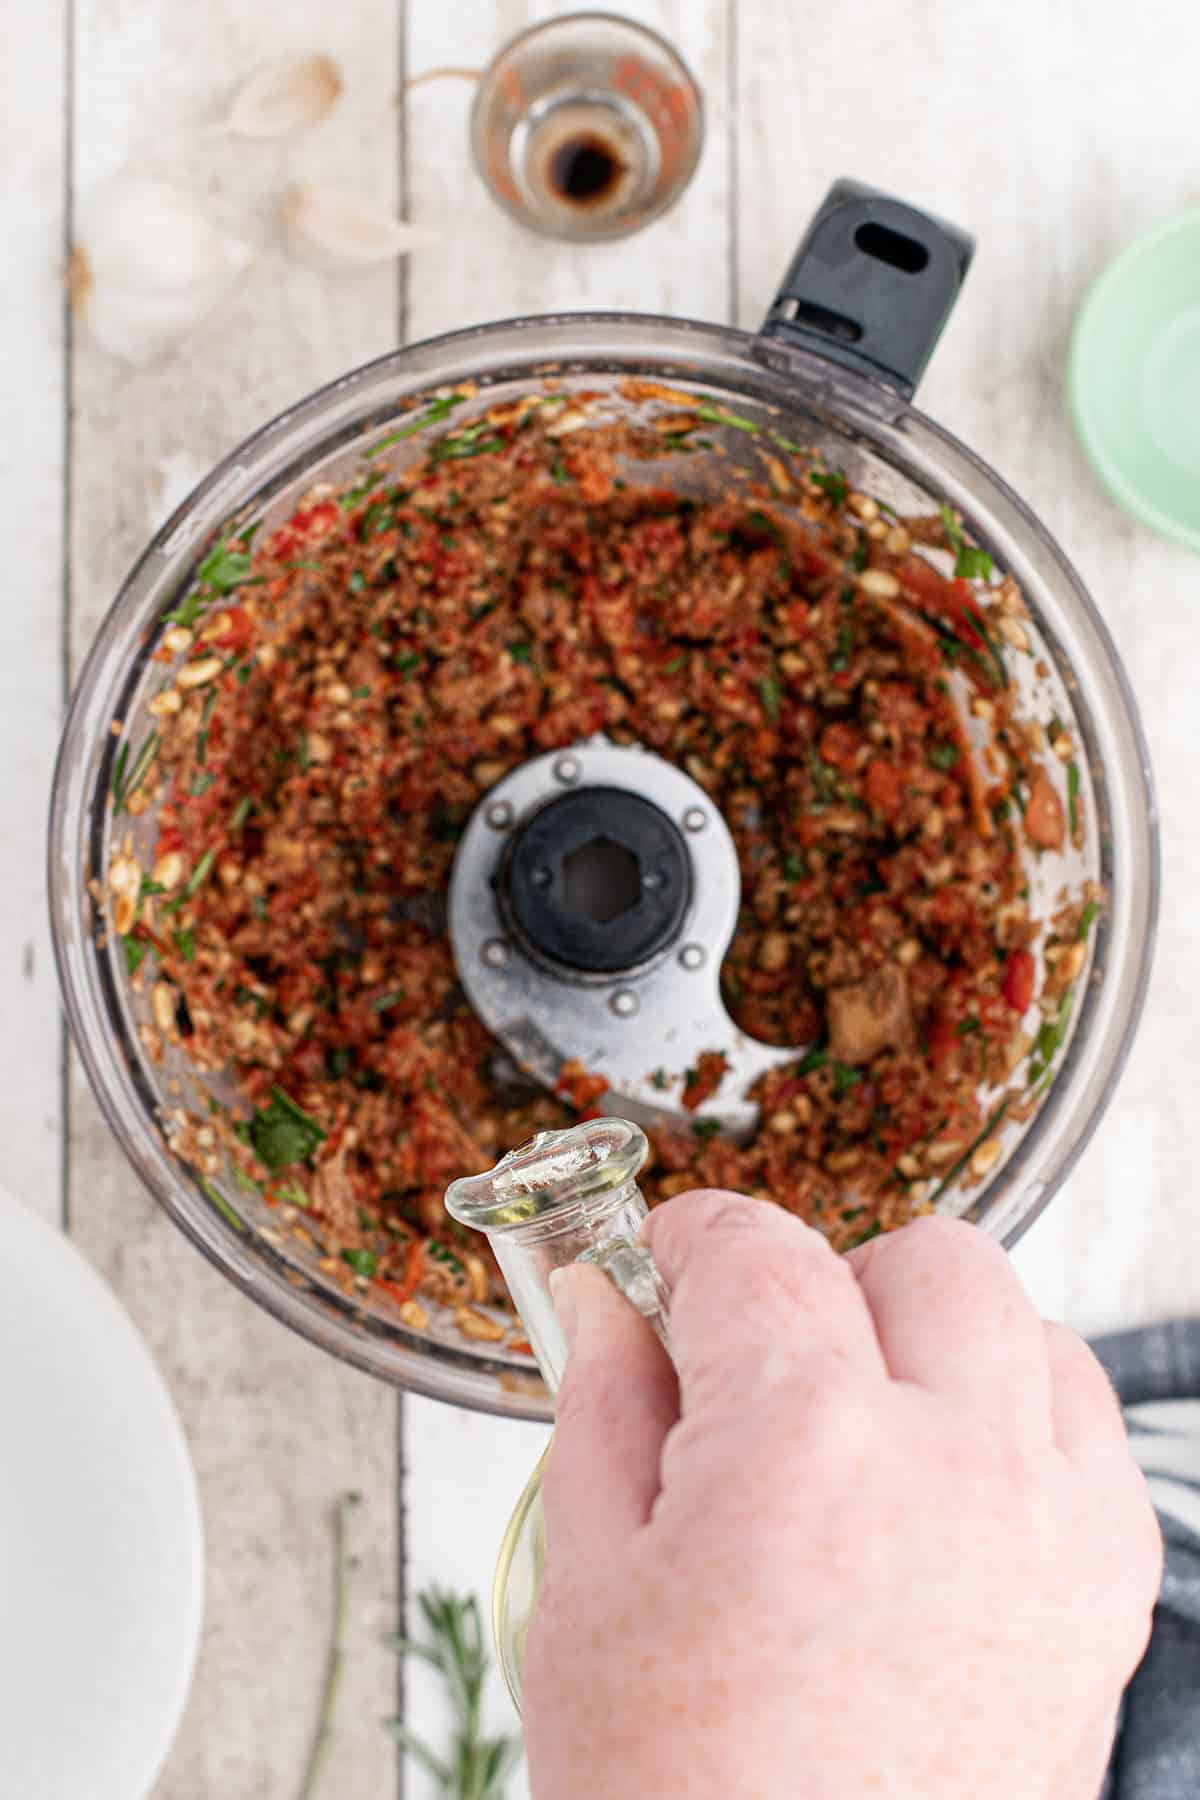 Drizzling olive oil into the sauce mixture in the food processor.